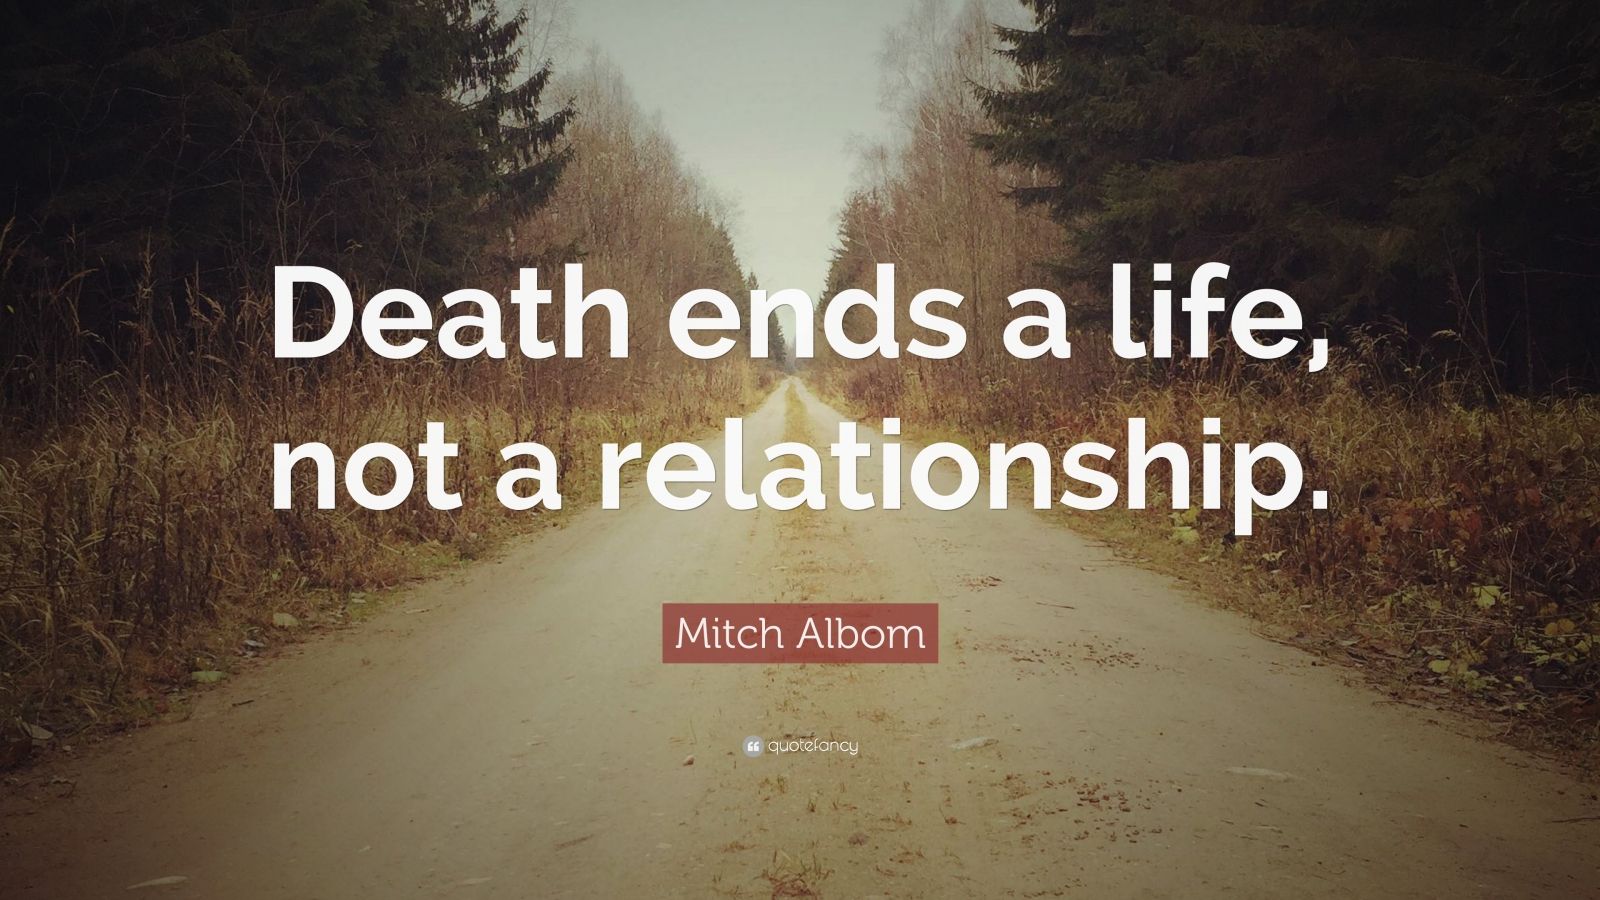 Mitch Albom Quote: “Death ends a life, not a relationship.” (25